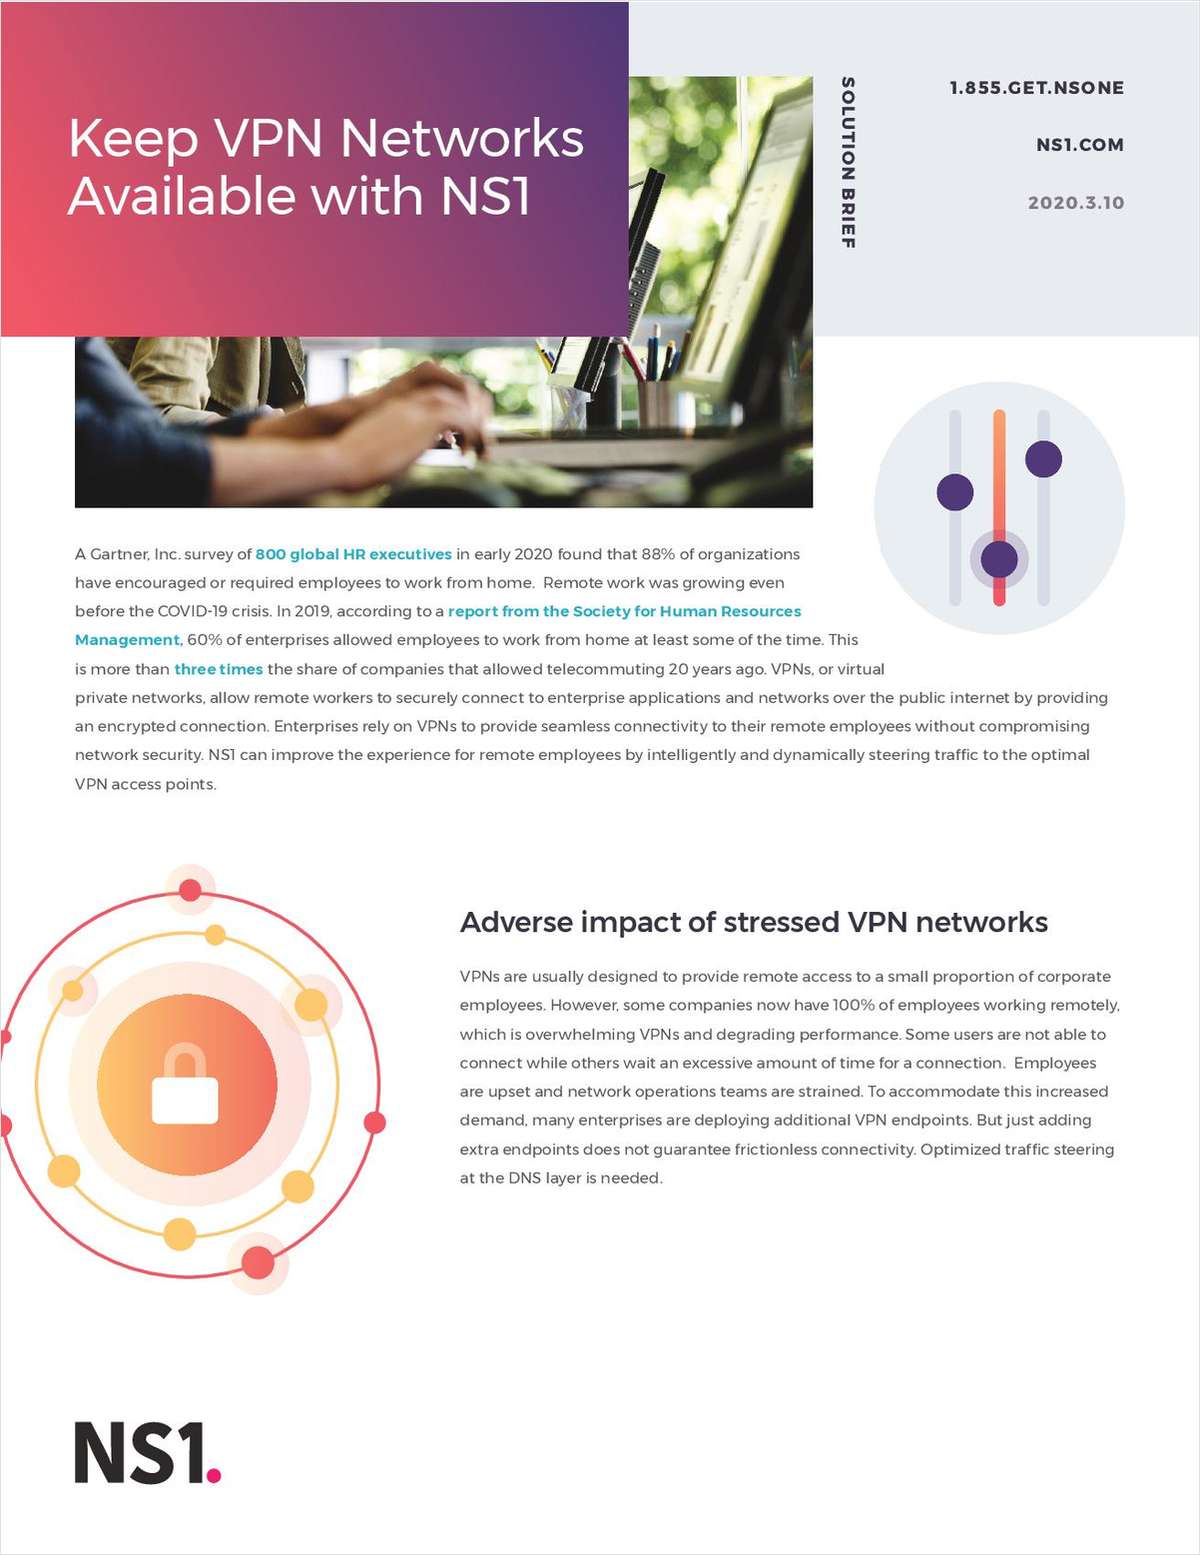 Keep VPN Networks Available with NS1